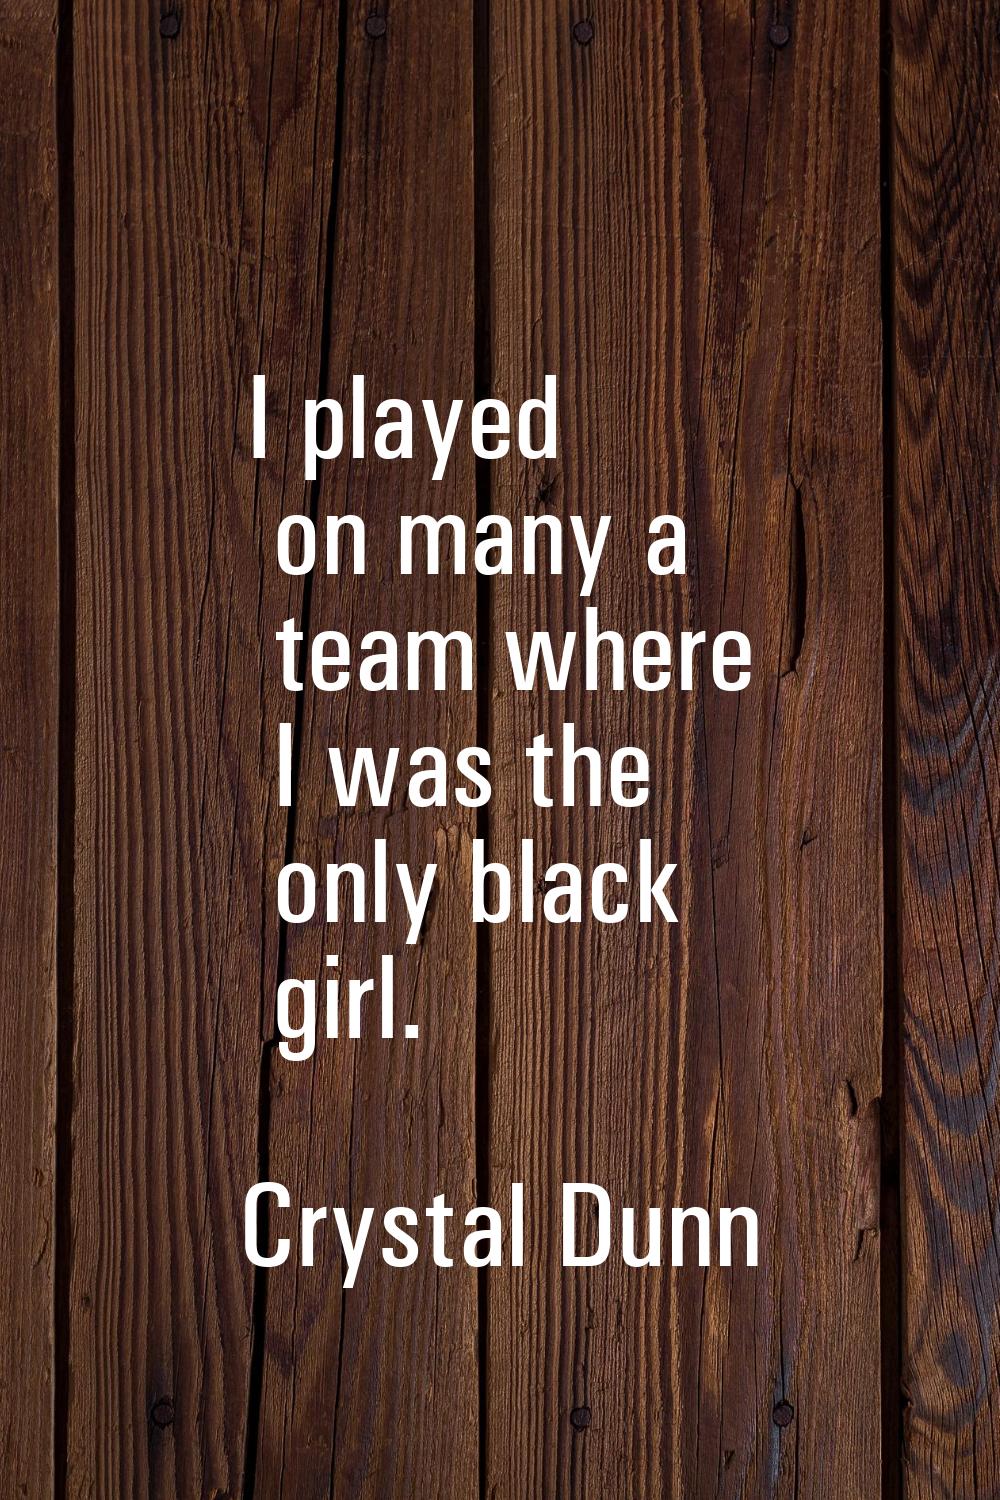 I played on many a team where I was the only black girl.